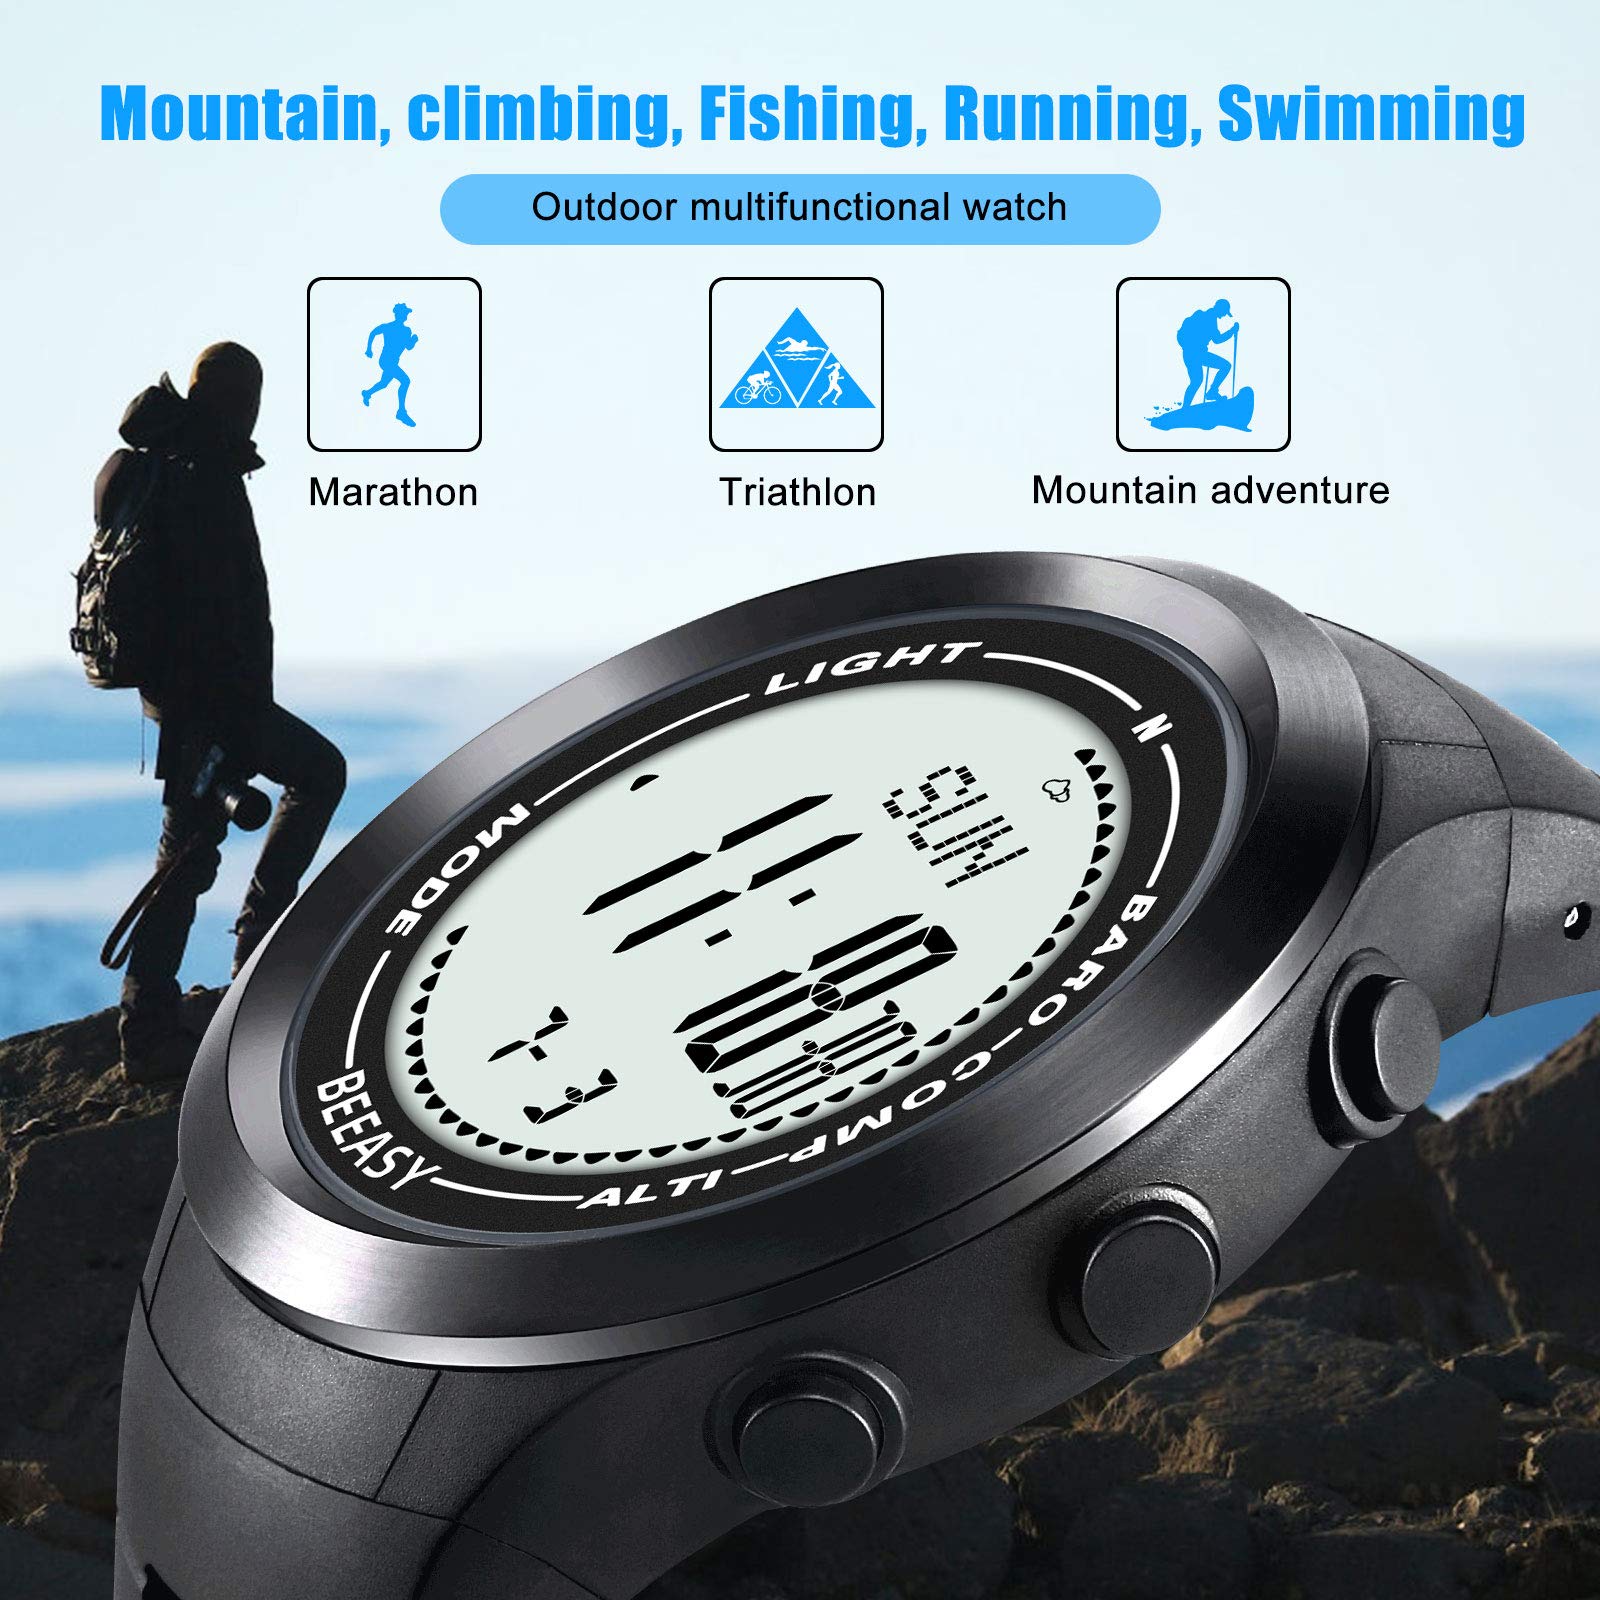 Beeasy Outdoor Sports Watch,Military Watches for Men Waterproof Stopwatch Alarm Army Watch,Men's Military Watch with Altimeter/Baromete/Compass